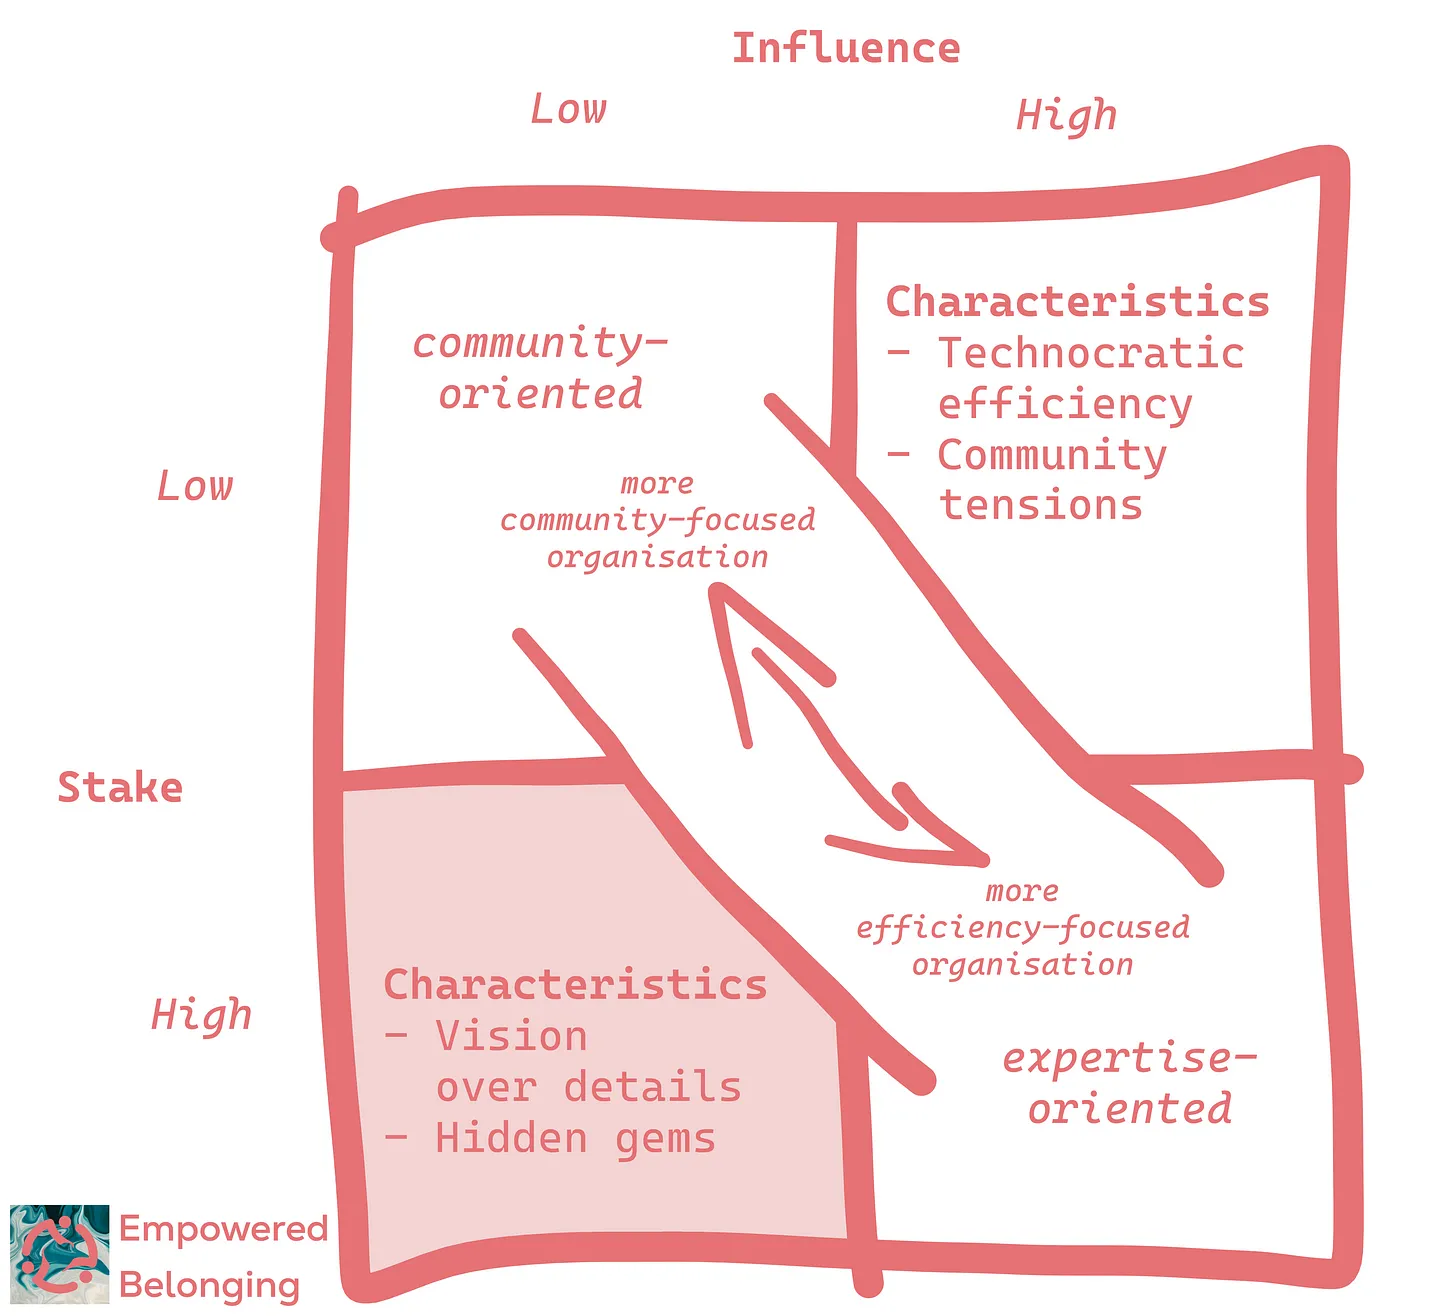 Low influence high stake communities lie in the bottom-left corner. As I'll explain, they are characterised by emphasising vision over the details and the chance to identified hidden gems amongst members.